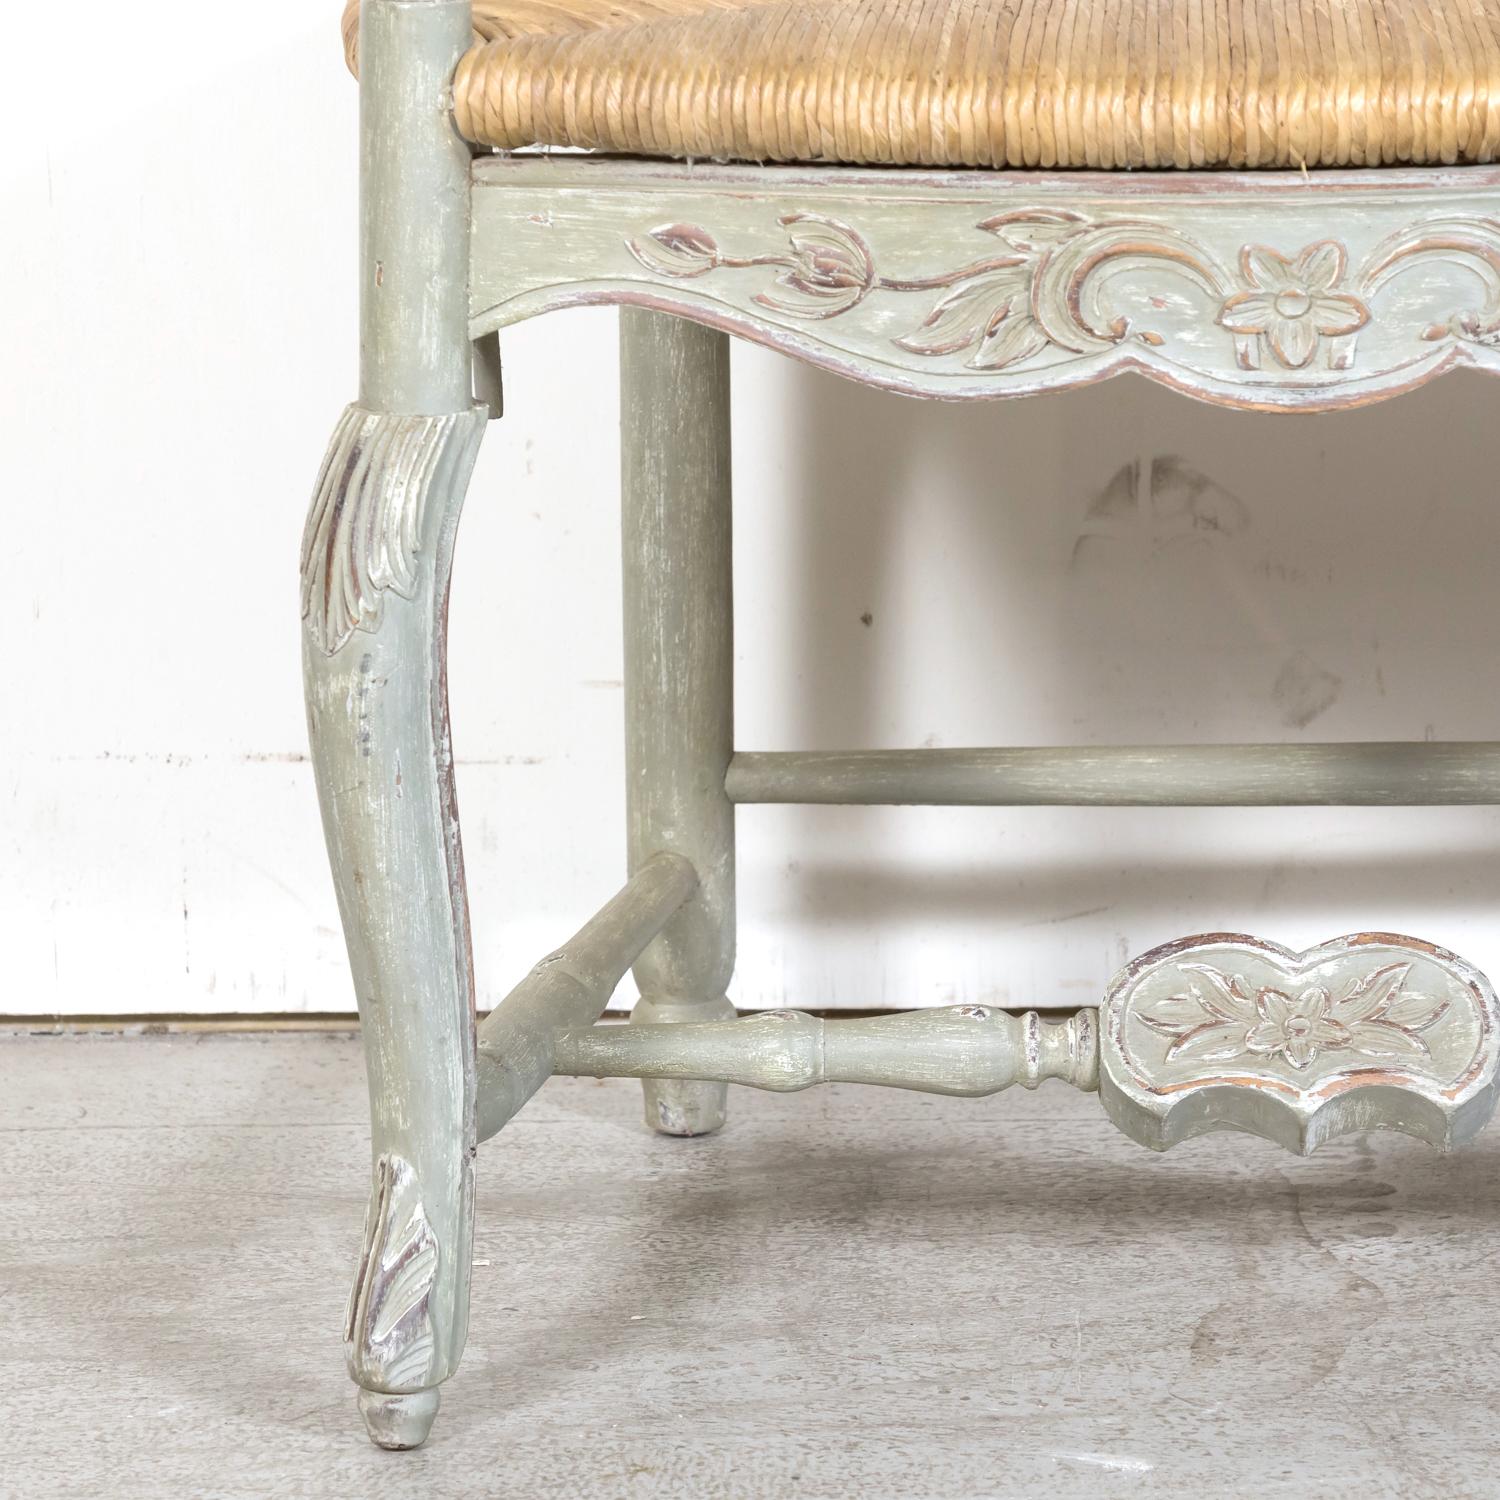 Early 20th Century Antique French Provençal Louis XV Style Painted Settee or Radassier W/ Rush Seat For Sale